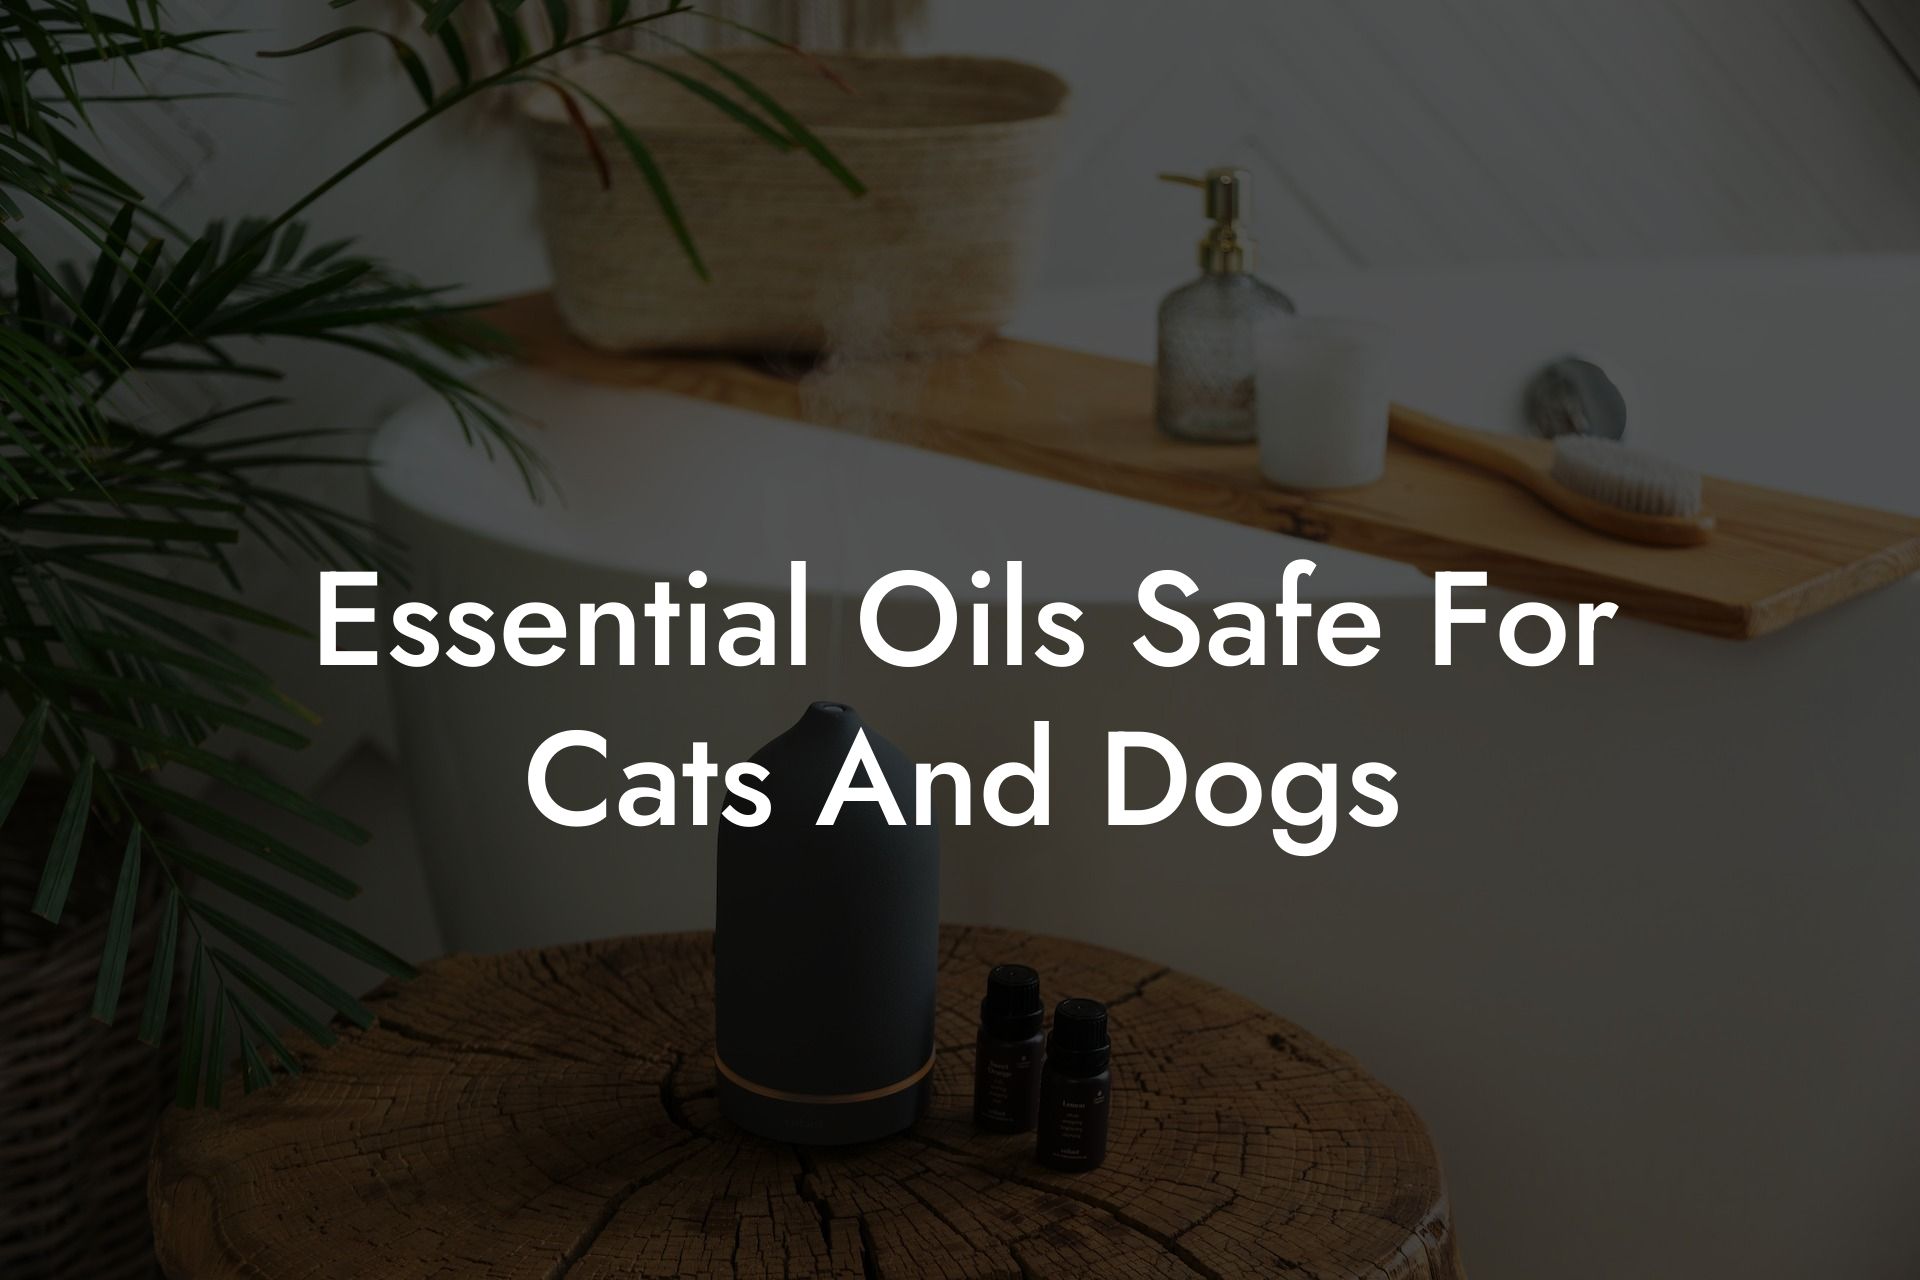 Essential Oils Safe For Cats And Dogs